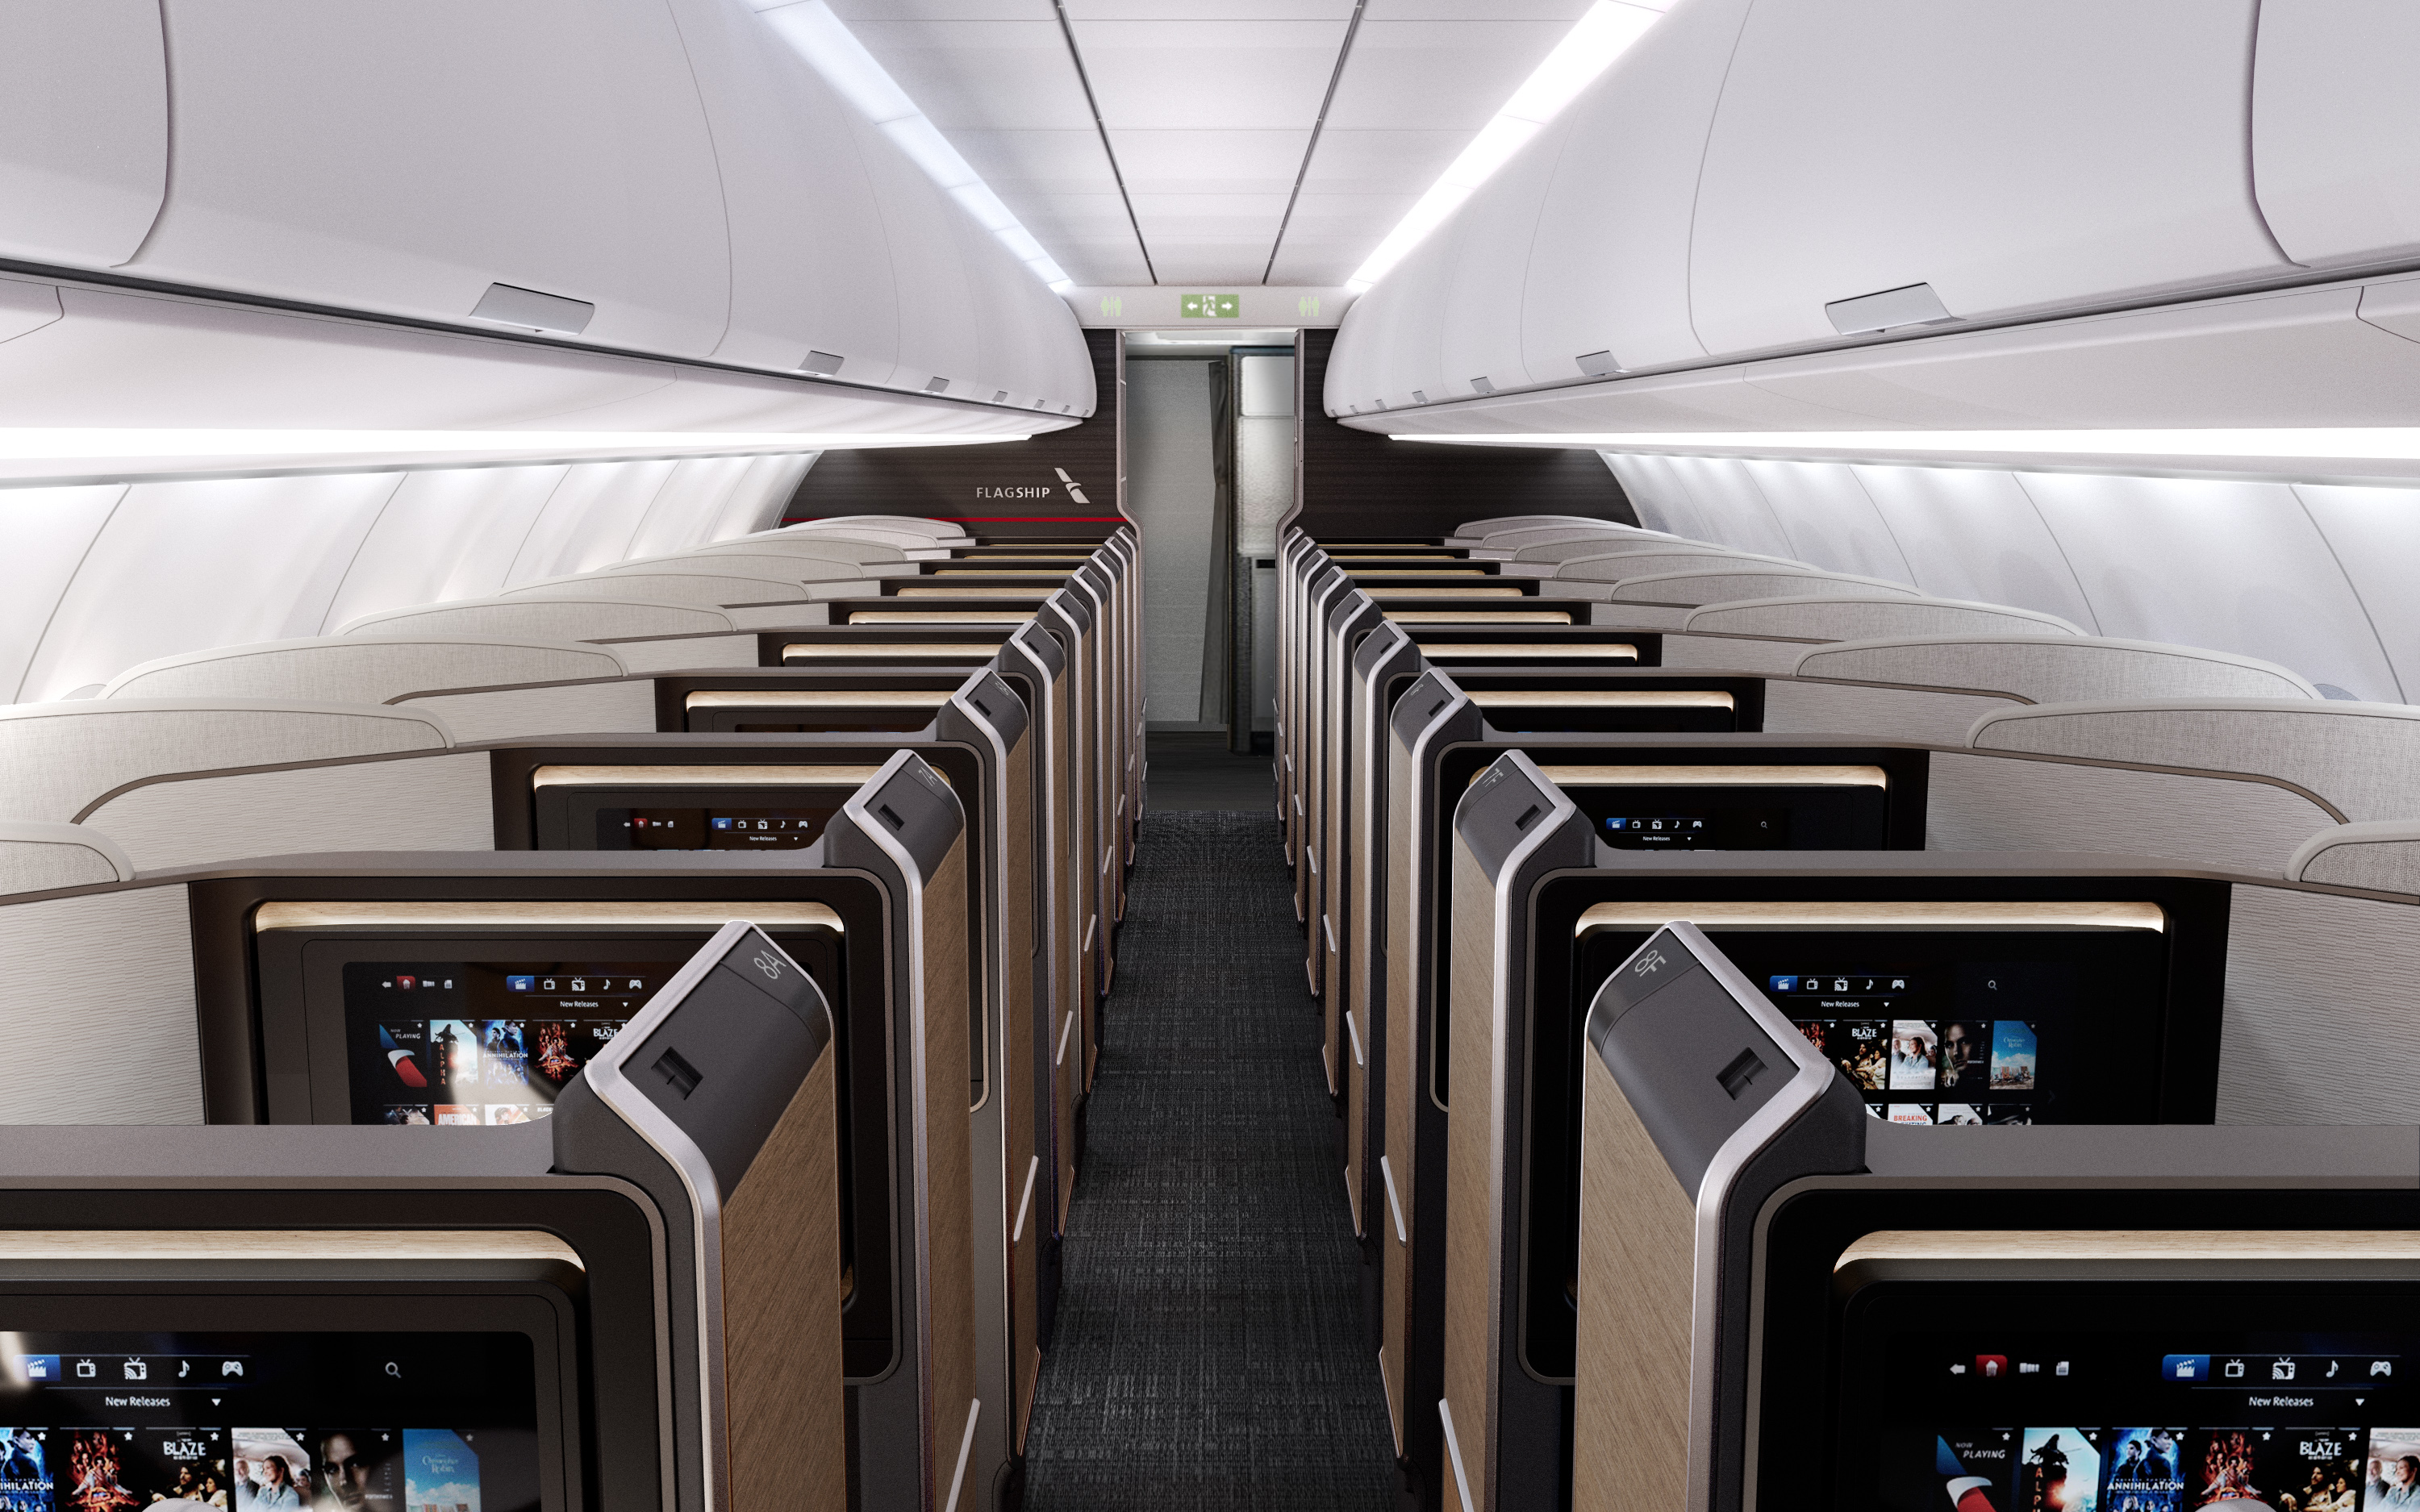 american airlines 2022 inside